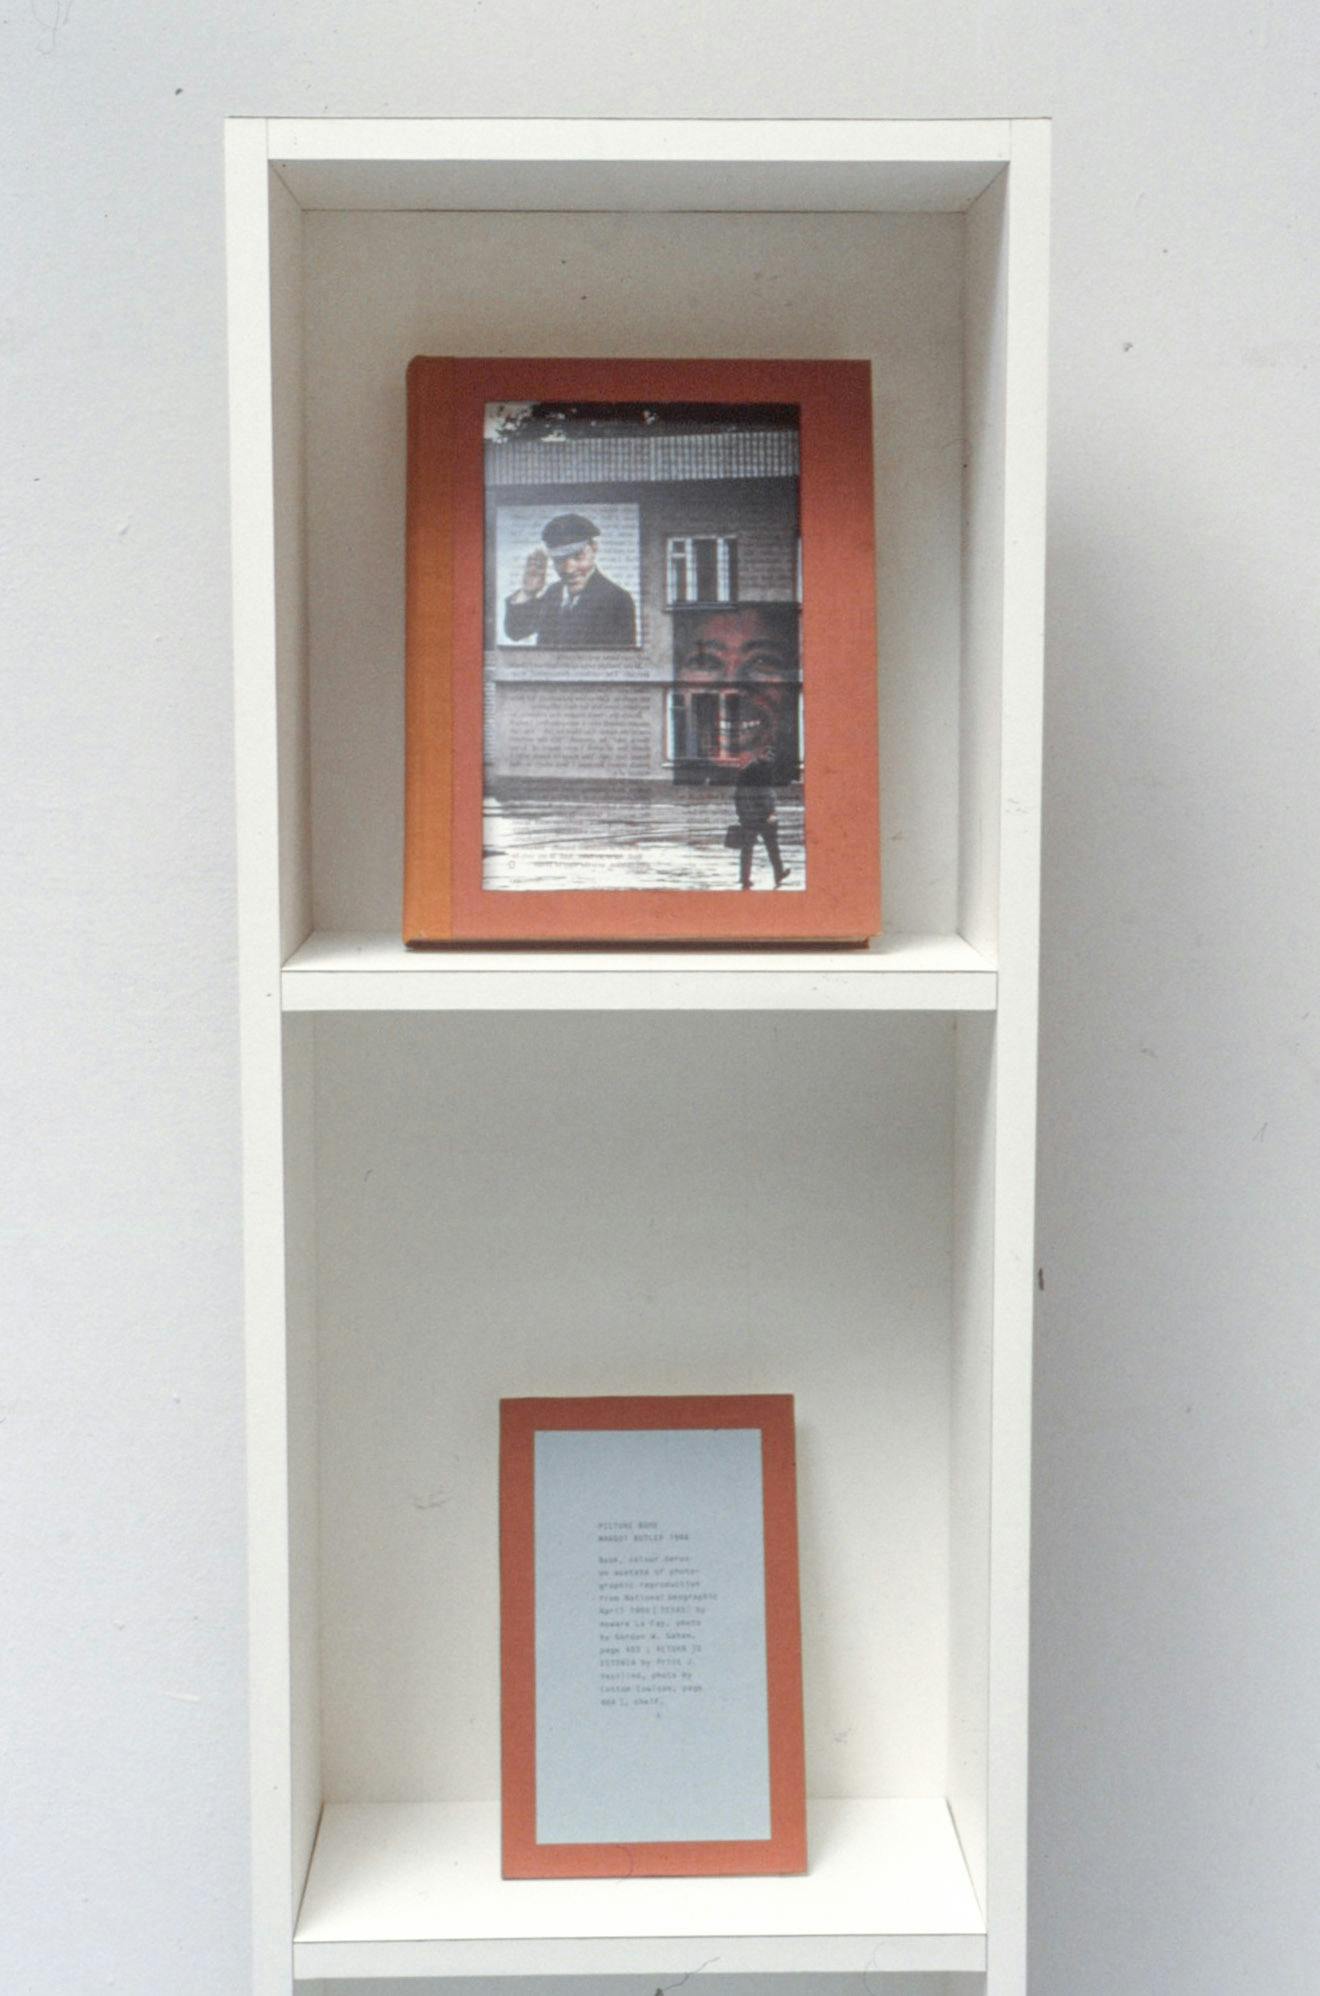 A closeup of a narrow white bookshelf against a wall. The top compartment shows a book with an orange cover, with a collage of faces and buildings. In the bottom there is a small poem in a wood frame.